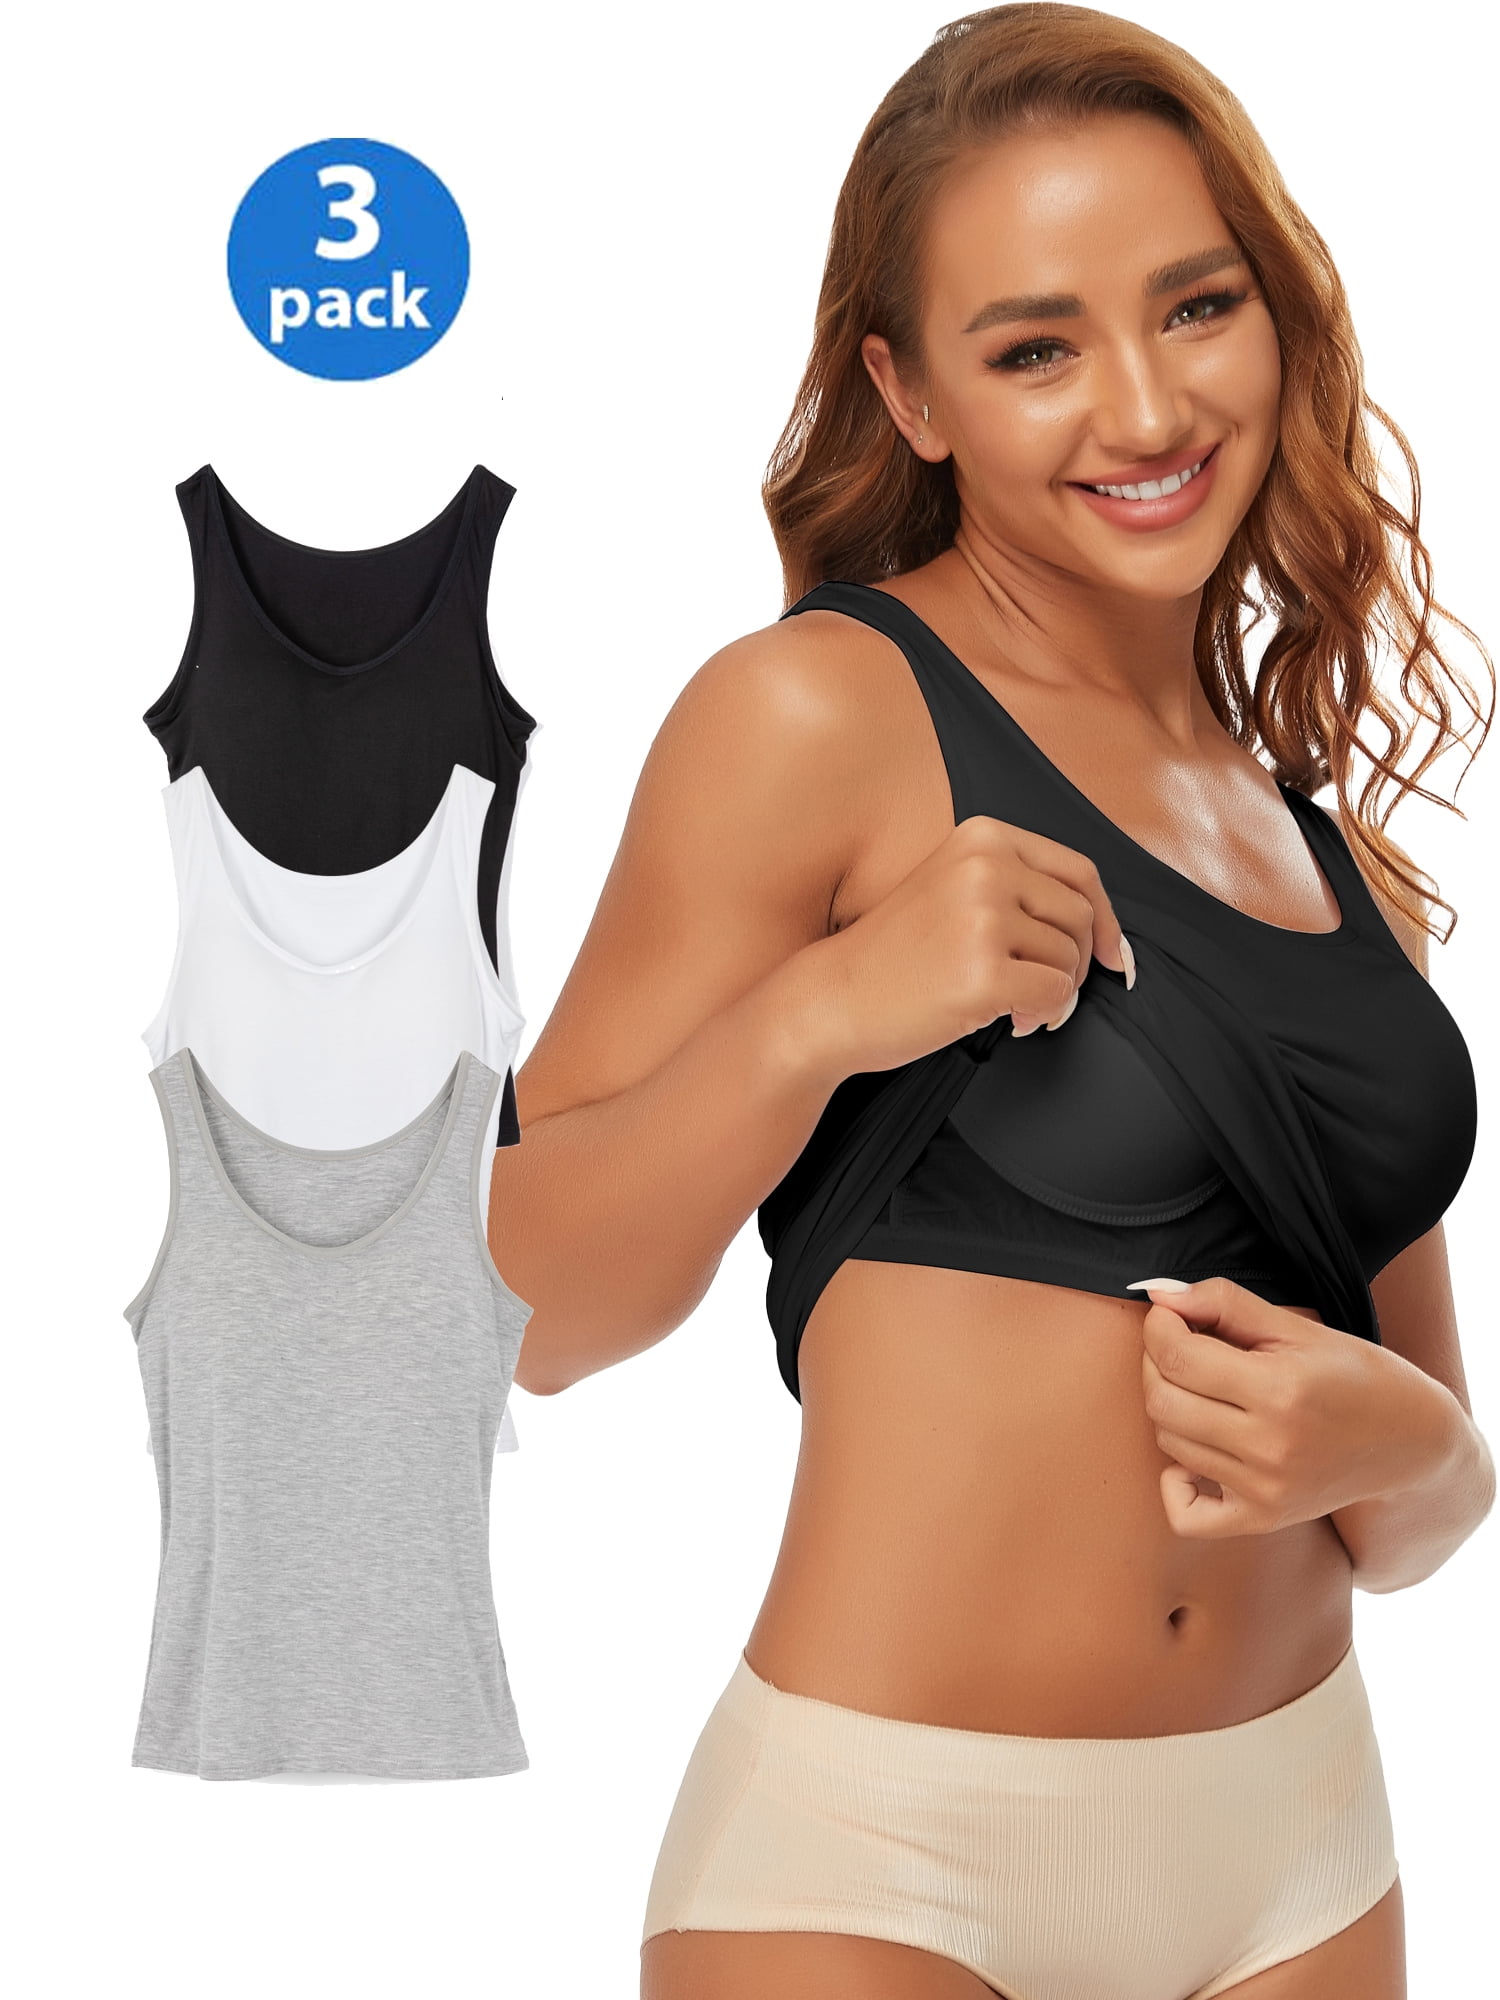 3 Pack Women's Camisole with Built in Bra Tank Tops for Layering